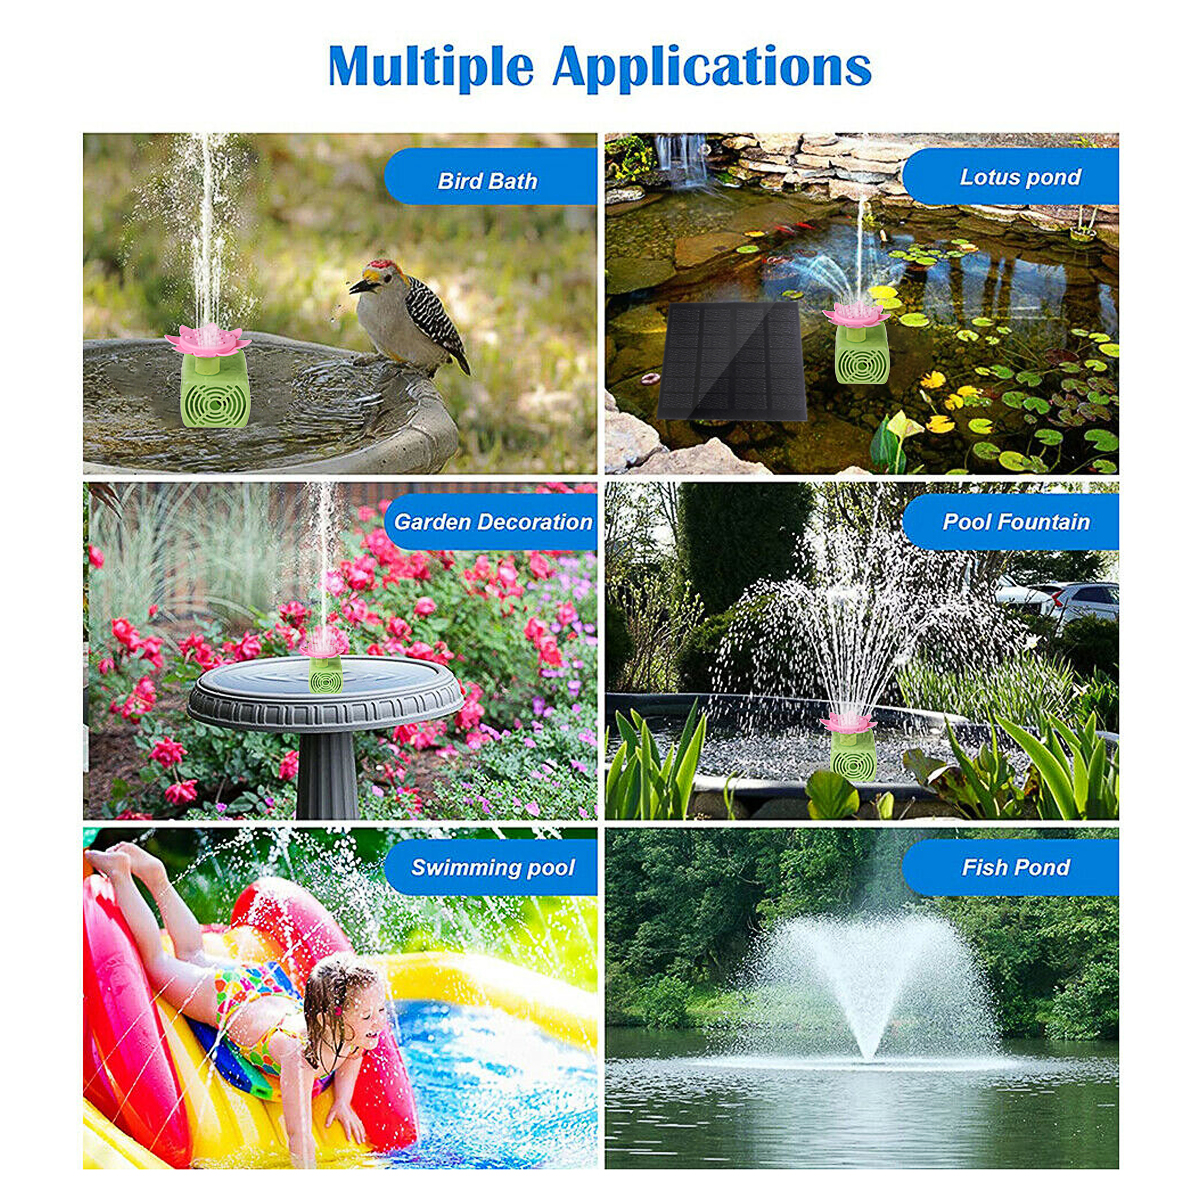 7V-14W-Solar-Powered-Water-Fountain-Pumps-Floating-Fountains-Pump-Waterproof-Home-Pond-Garden-Decor-1839781-8